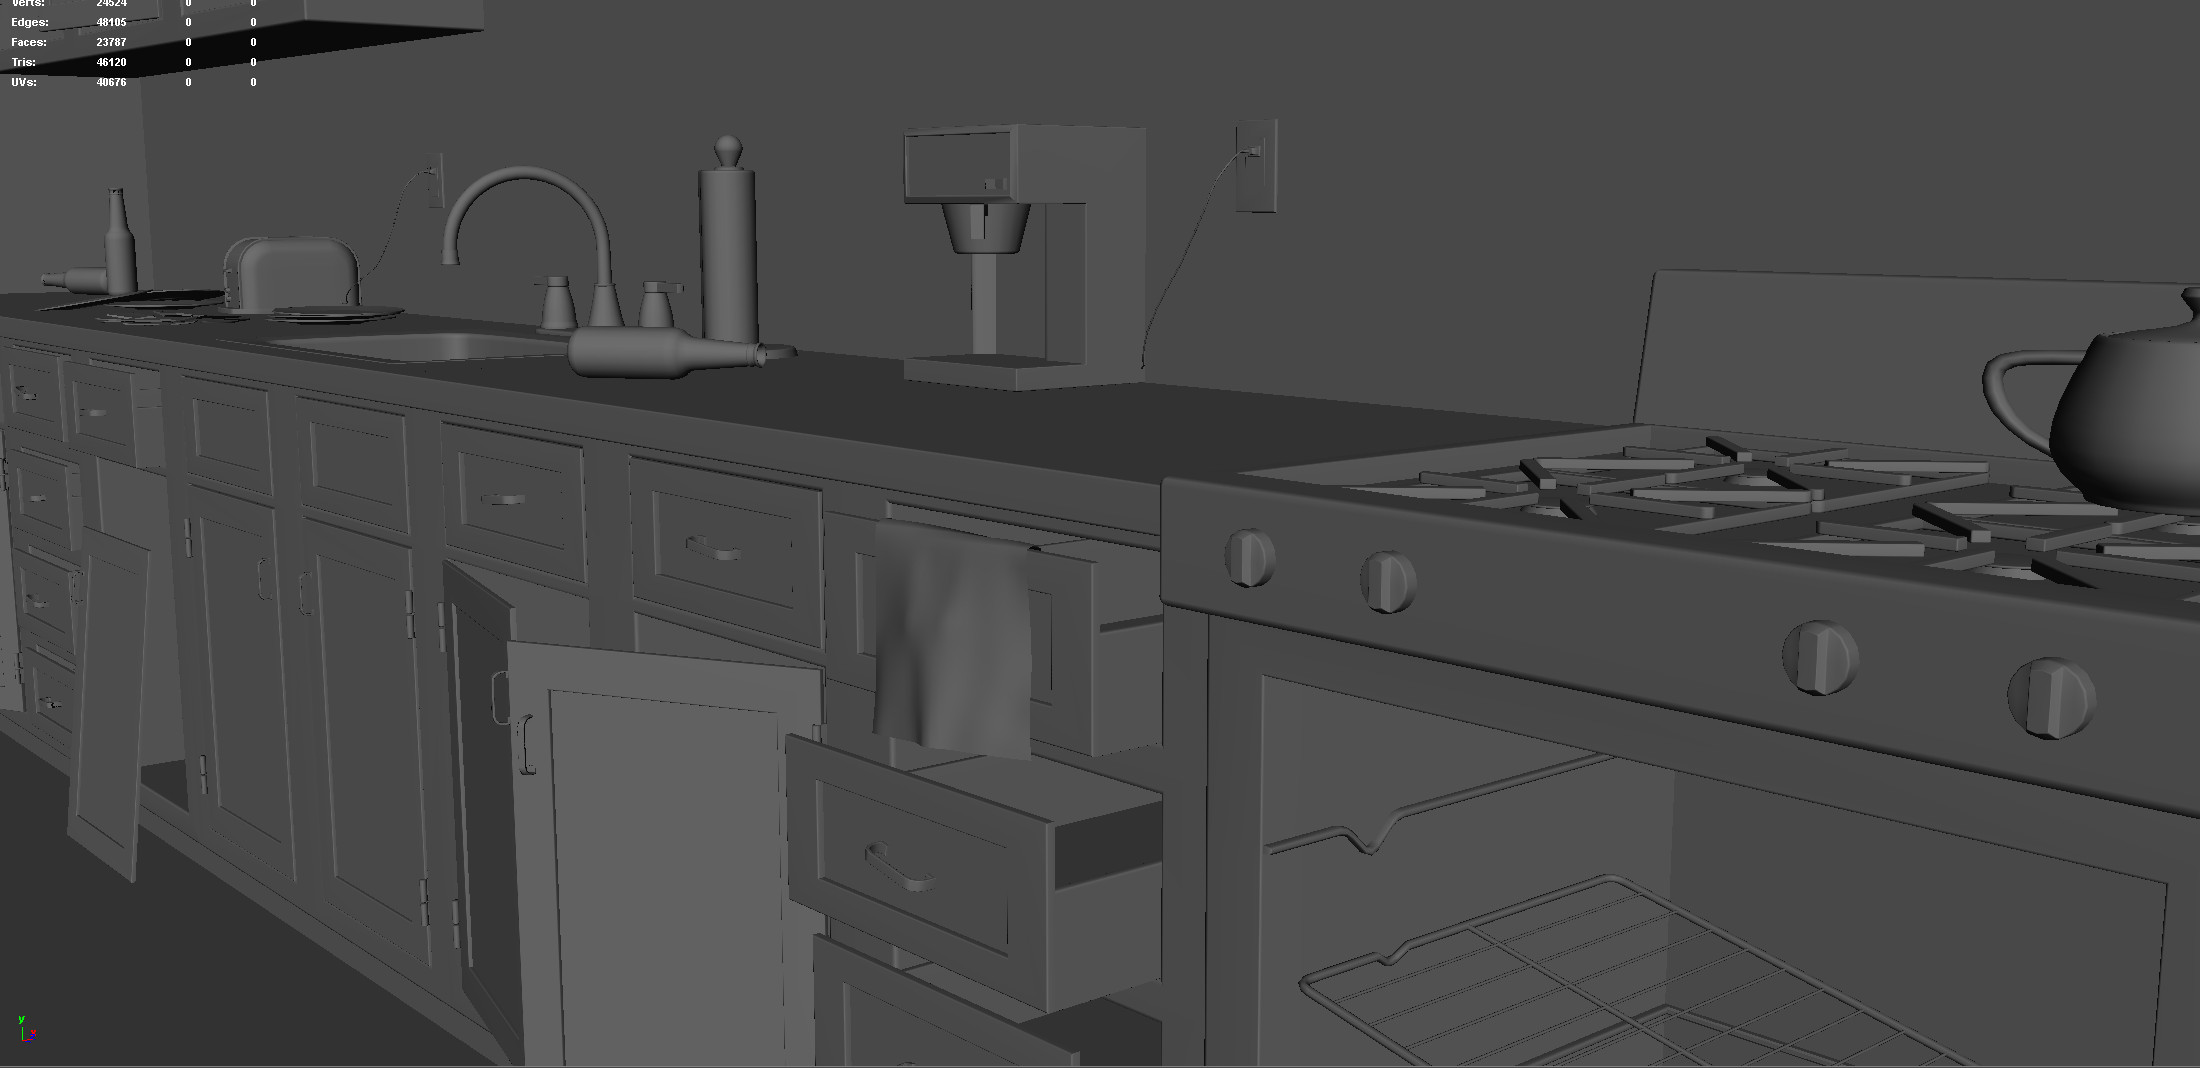 Cafeteria Counter 2 (Modeling Stage)